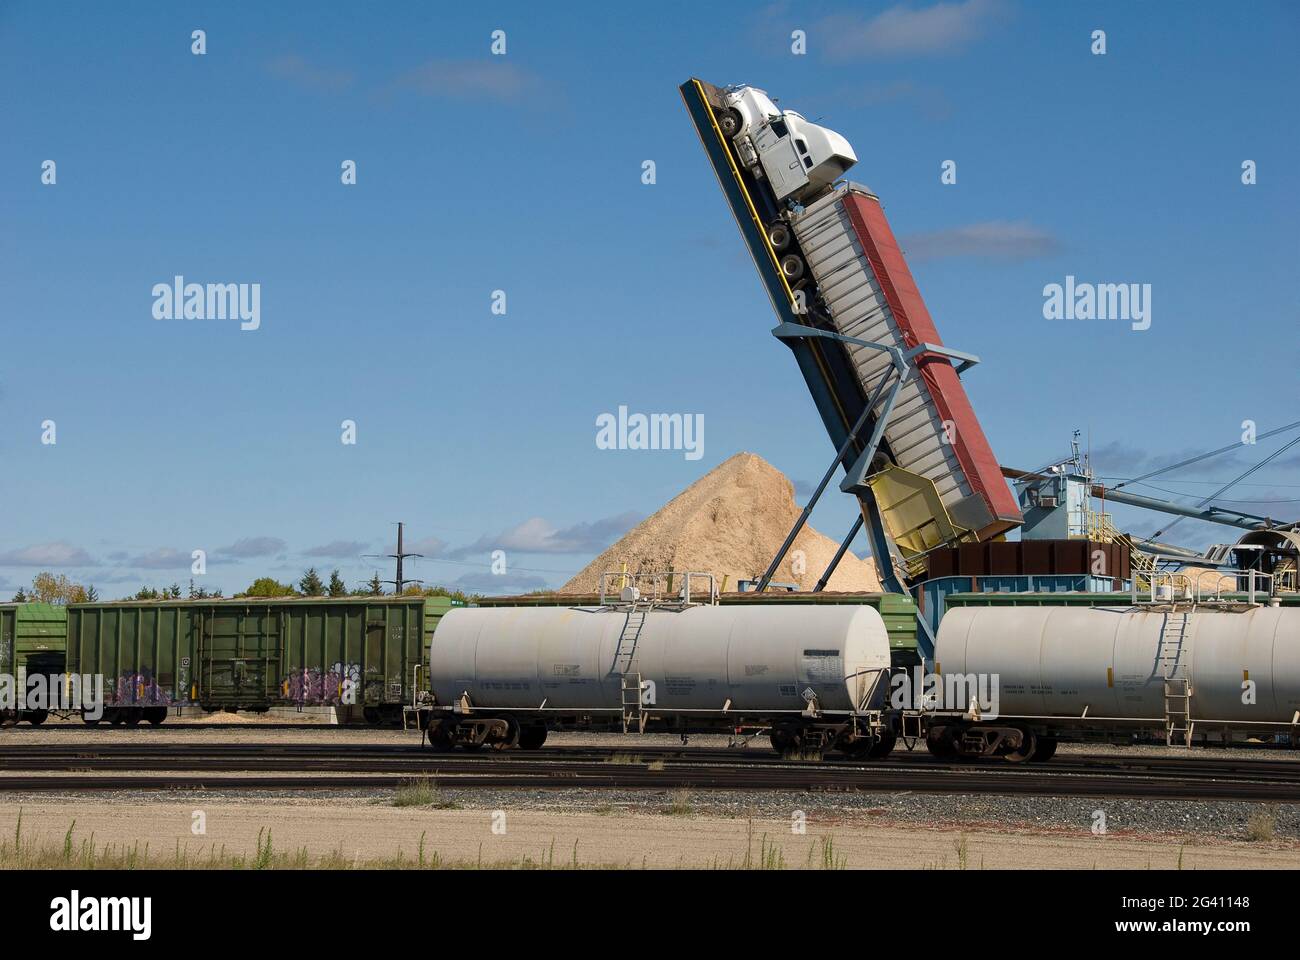 hydraulic lift called a 'truck tipper'  is used to unload wood chips at paper/pulp mill yard - International Falls, Minnesota - USA Stock Photo